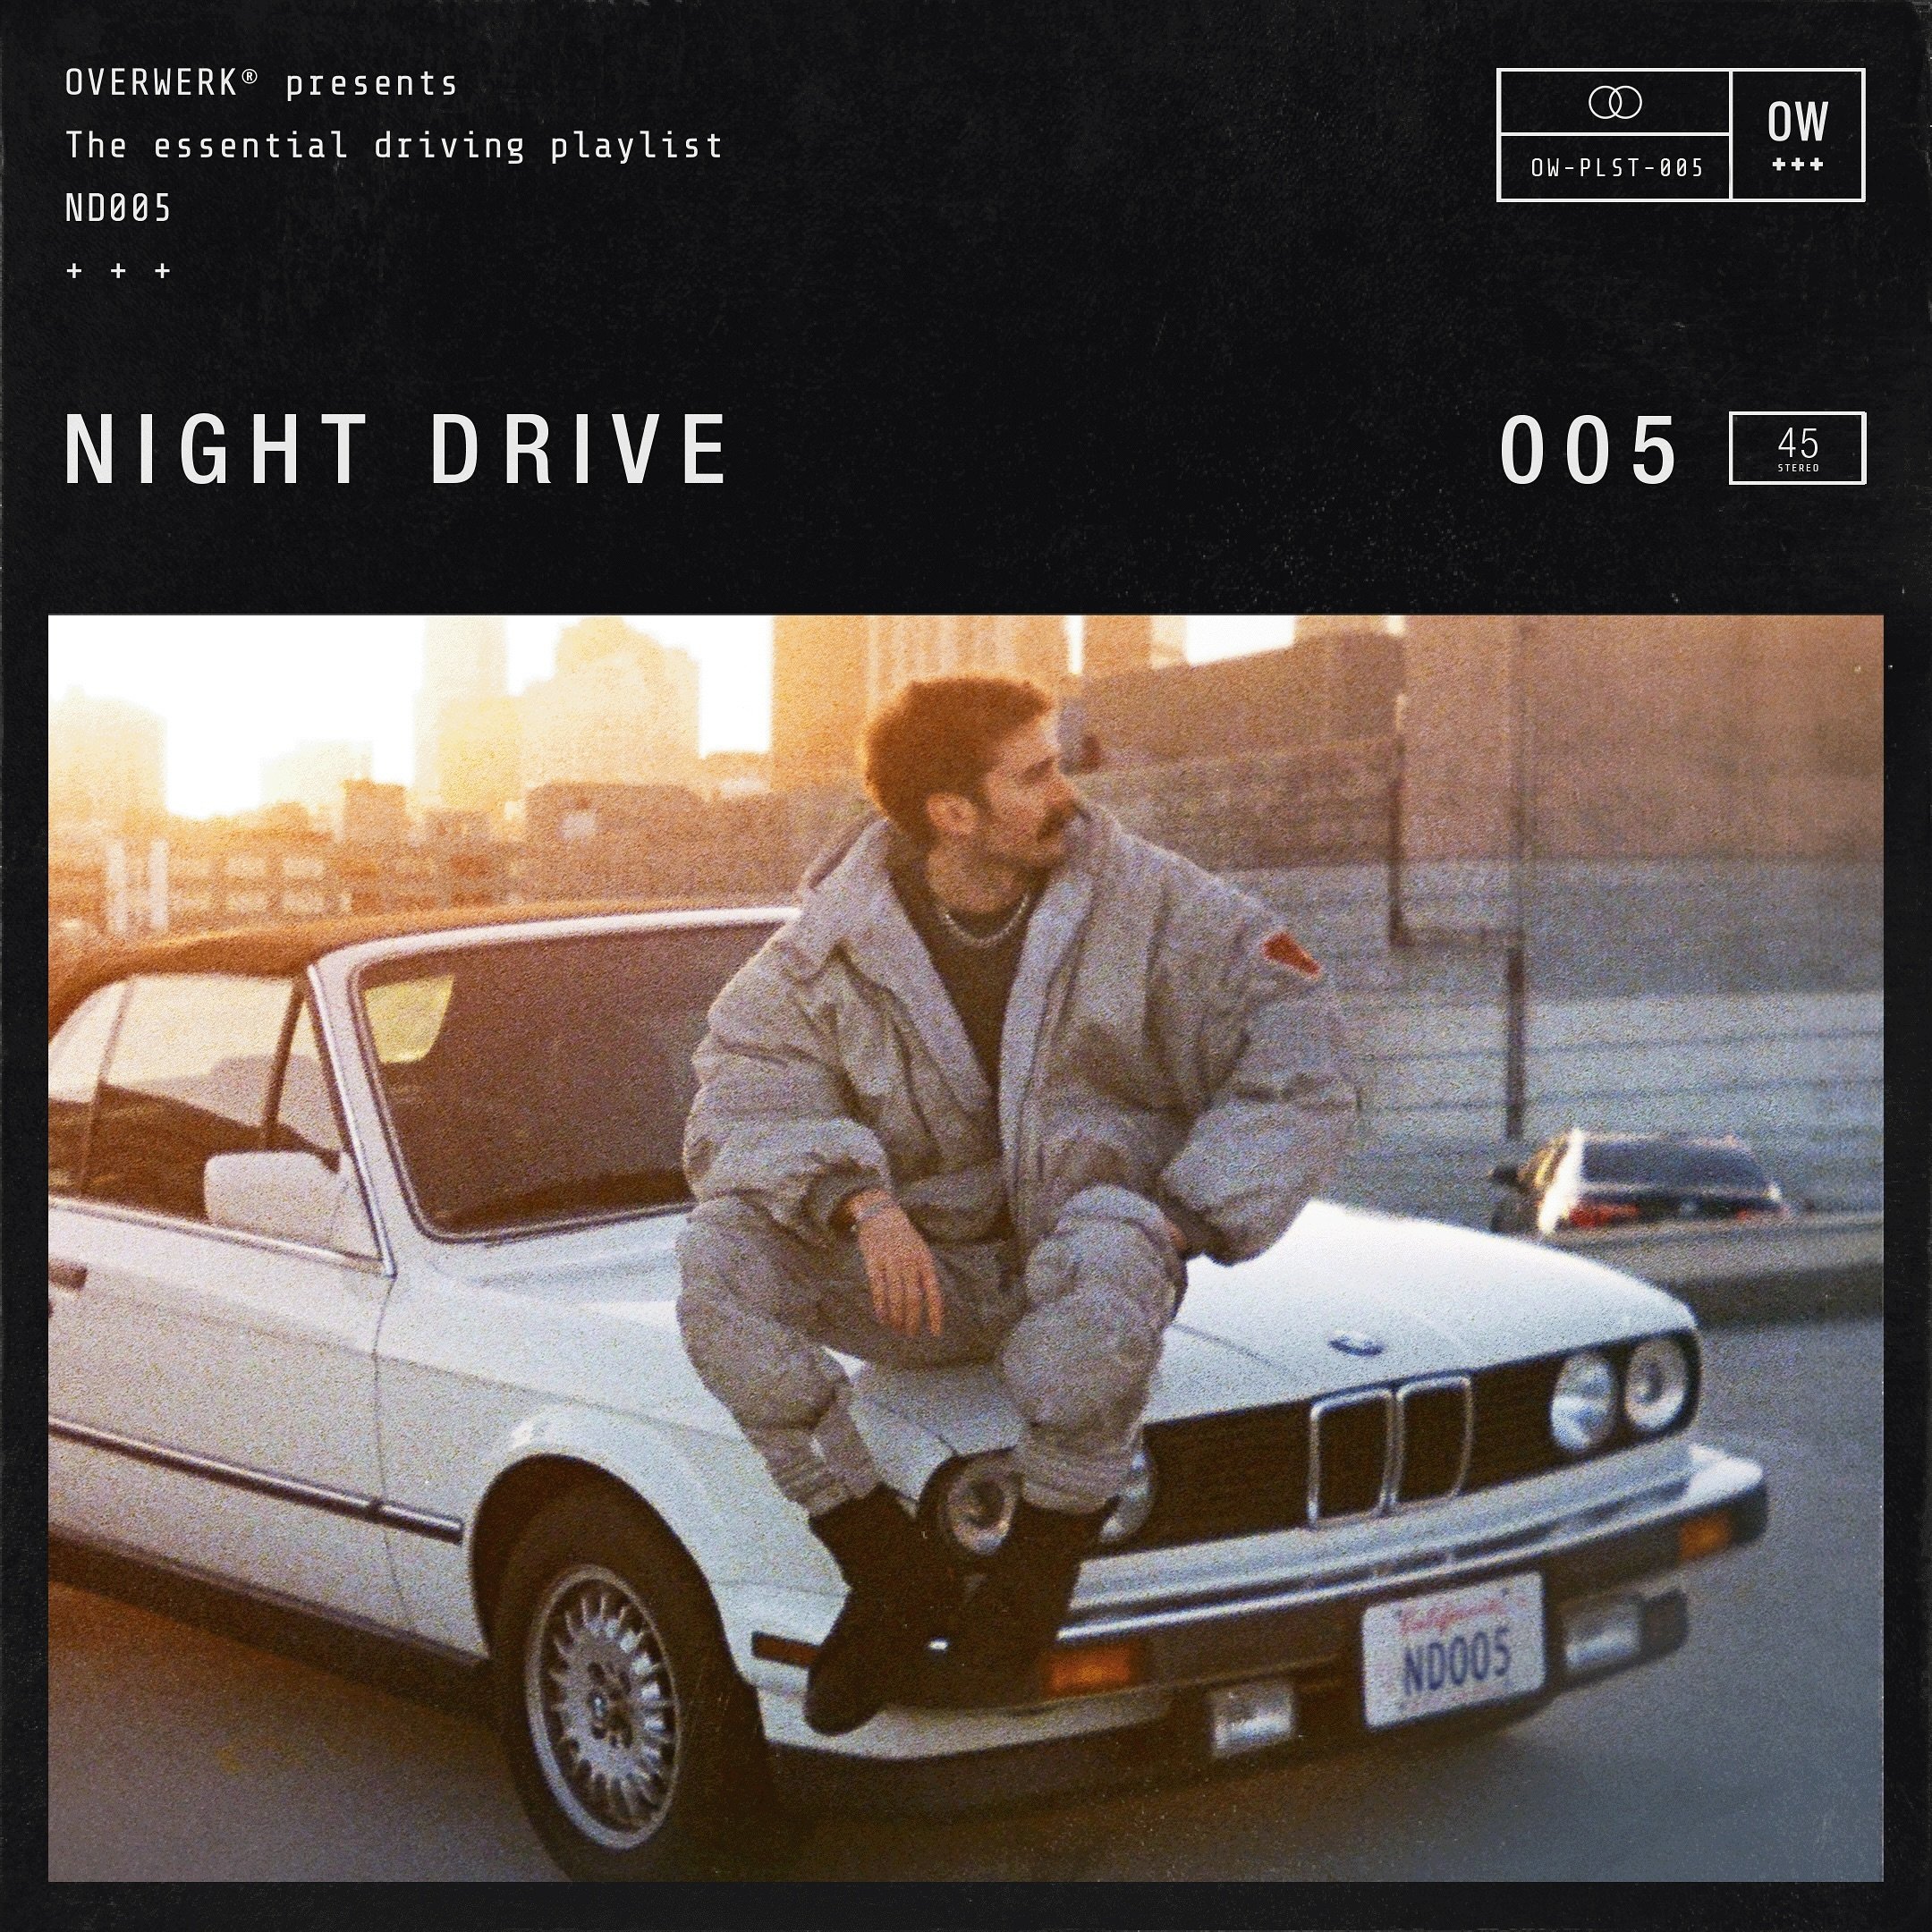 Playlist link in bio

Night Drive 005 is out now!